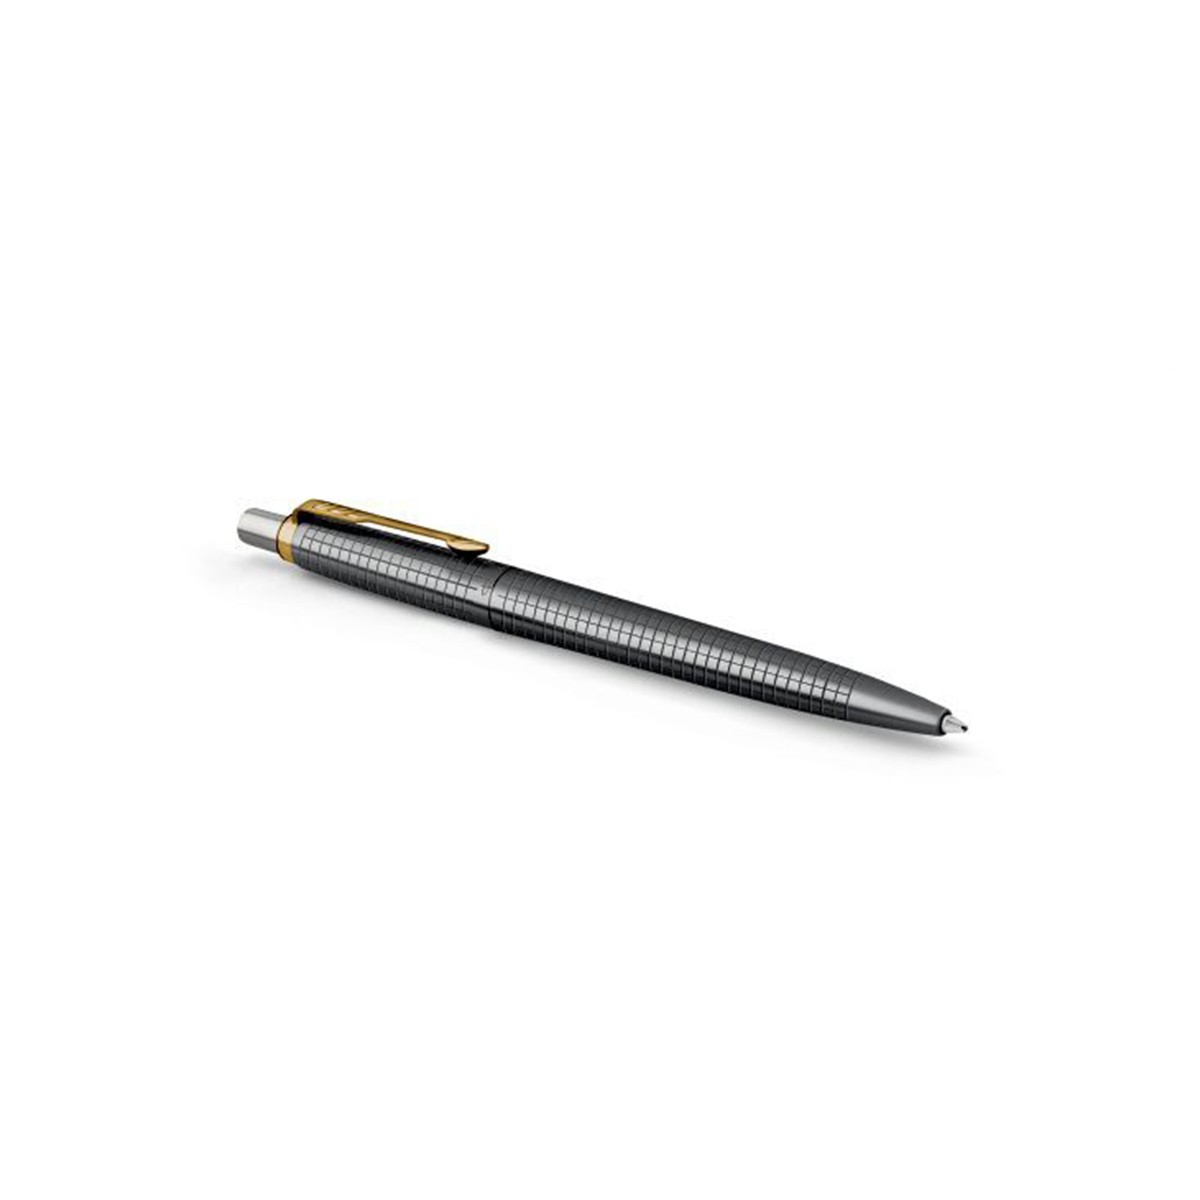 PARKER Jotter Στυλό Διαρκείας 70th Stainless Steel CT Special Edition